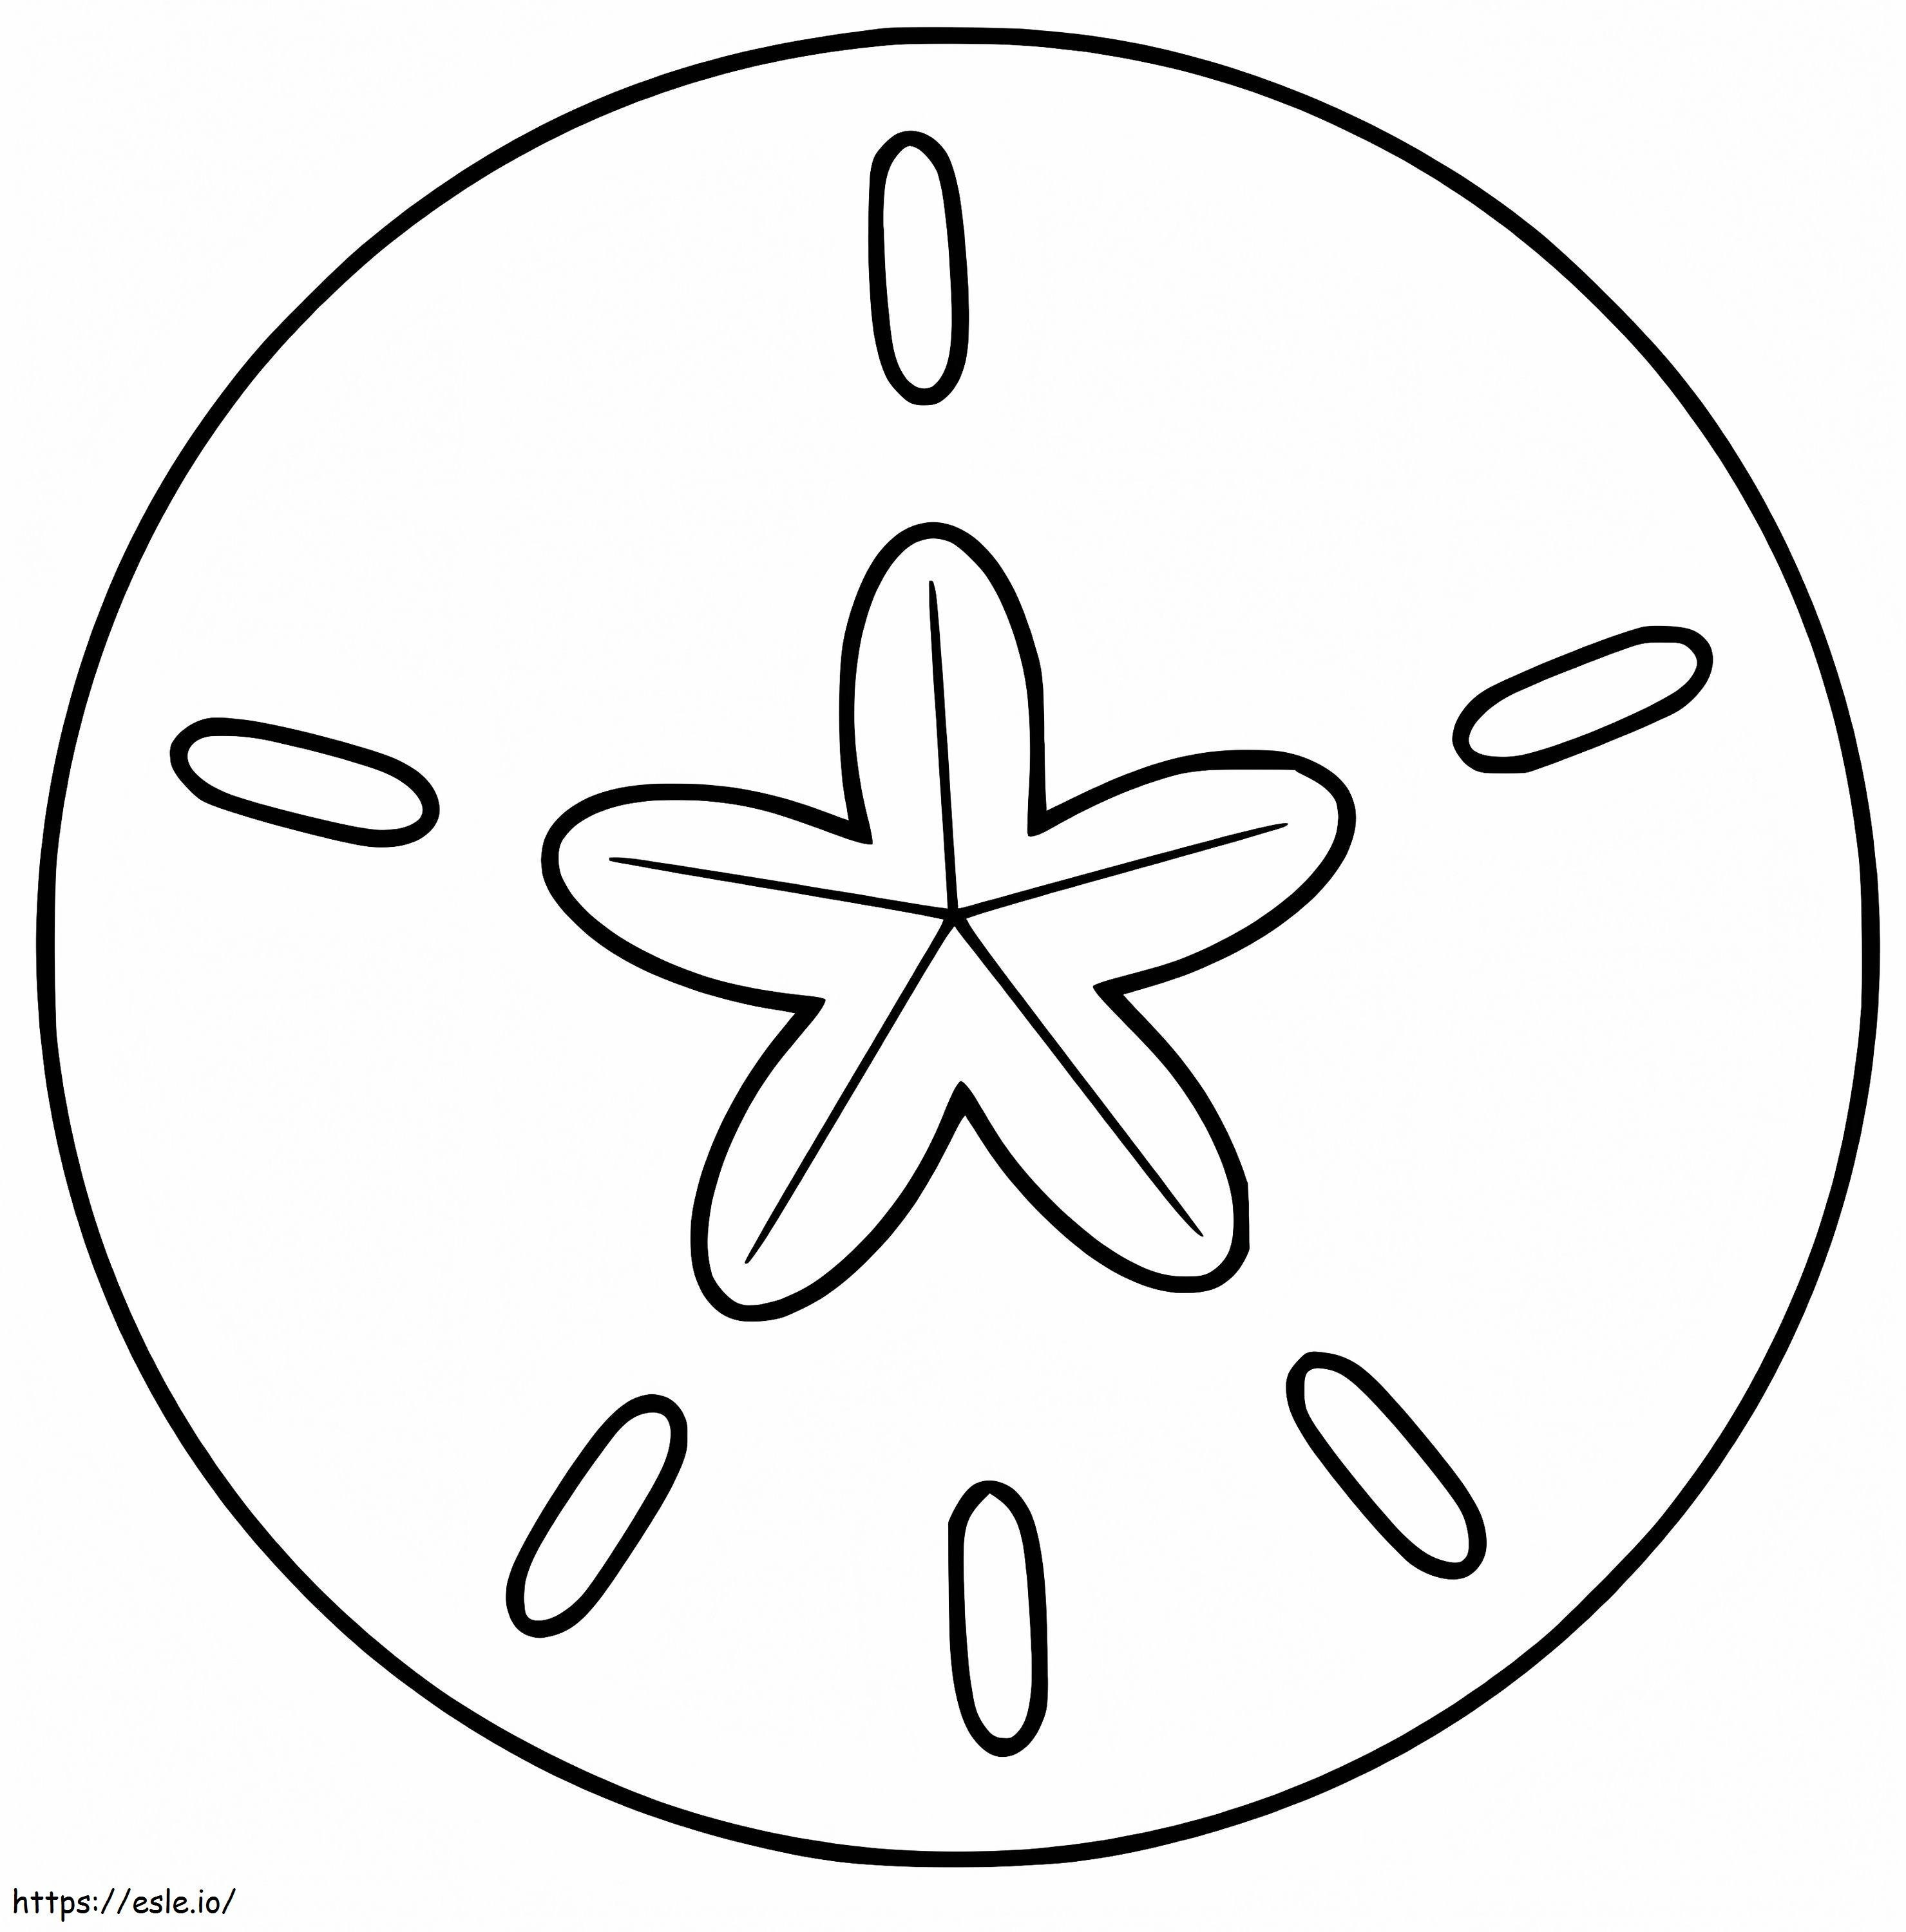 Normal Sand Dollar coloring page